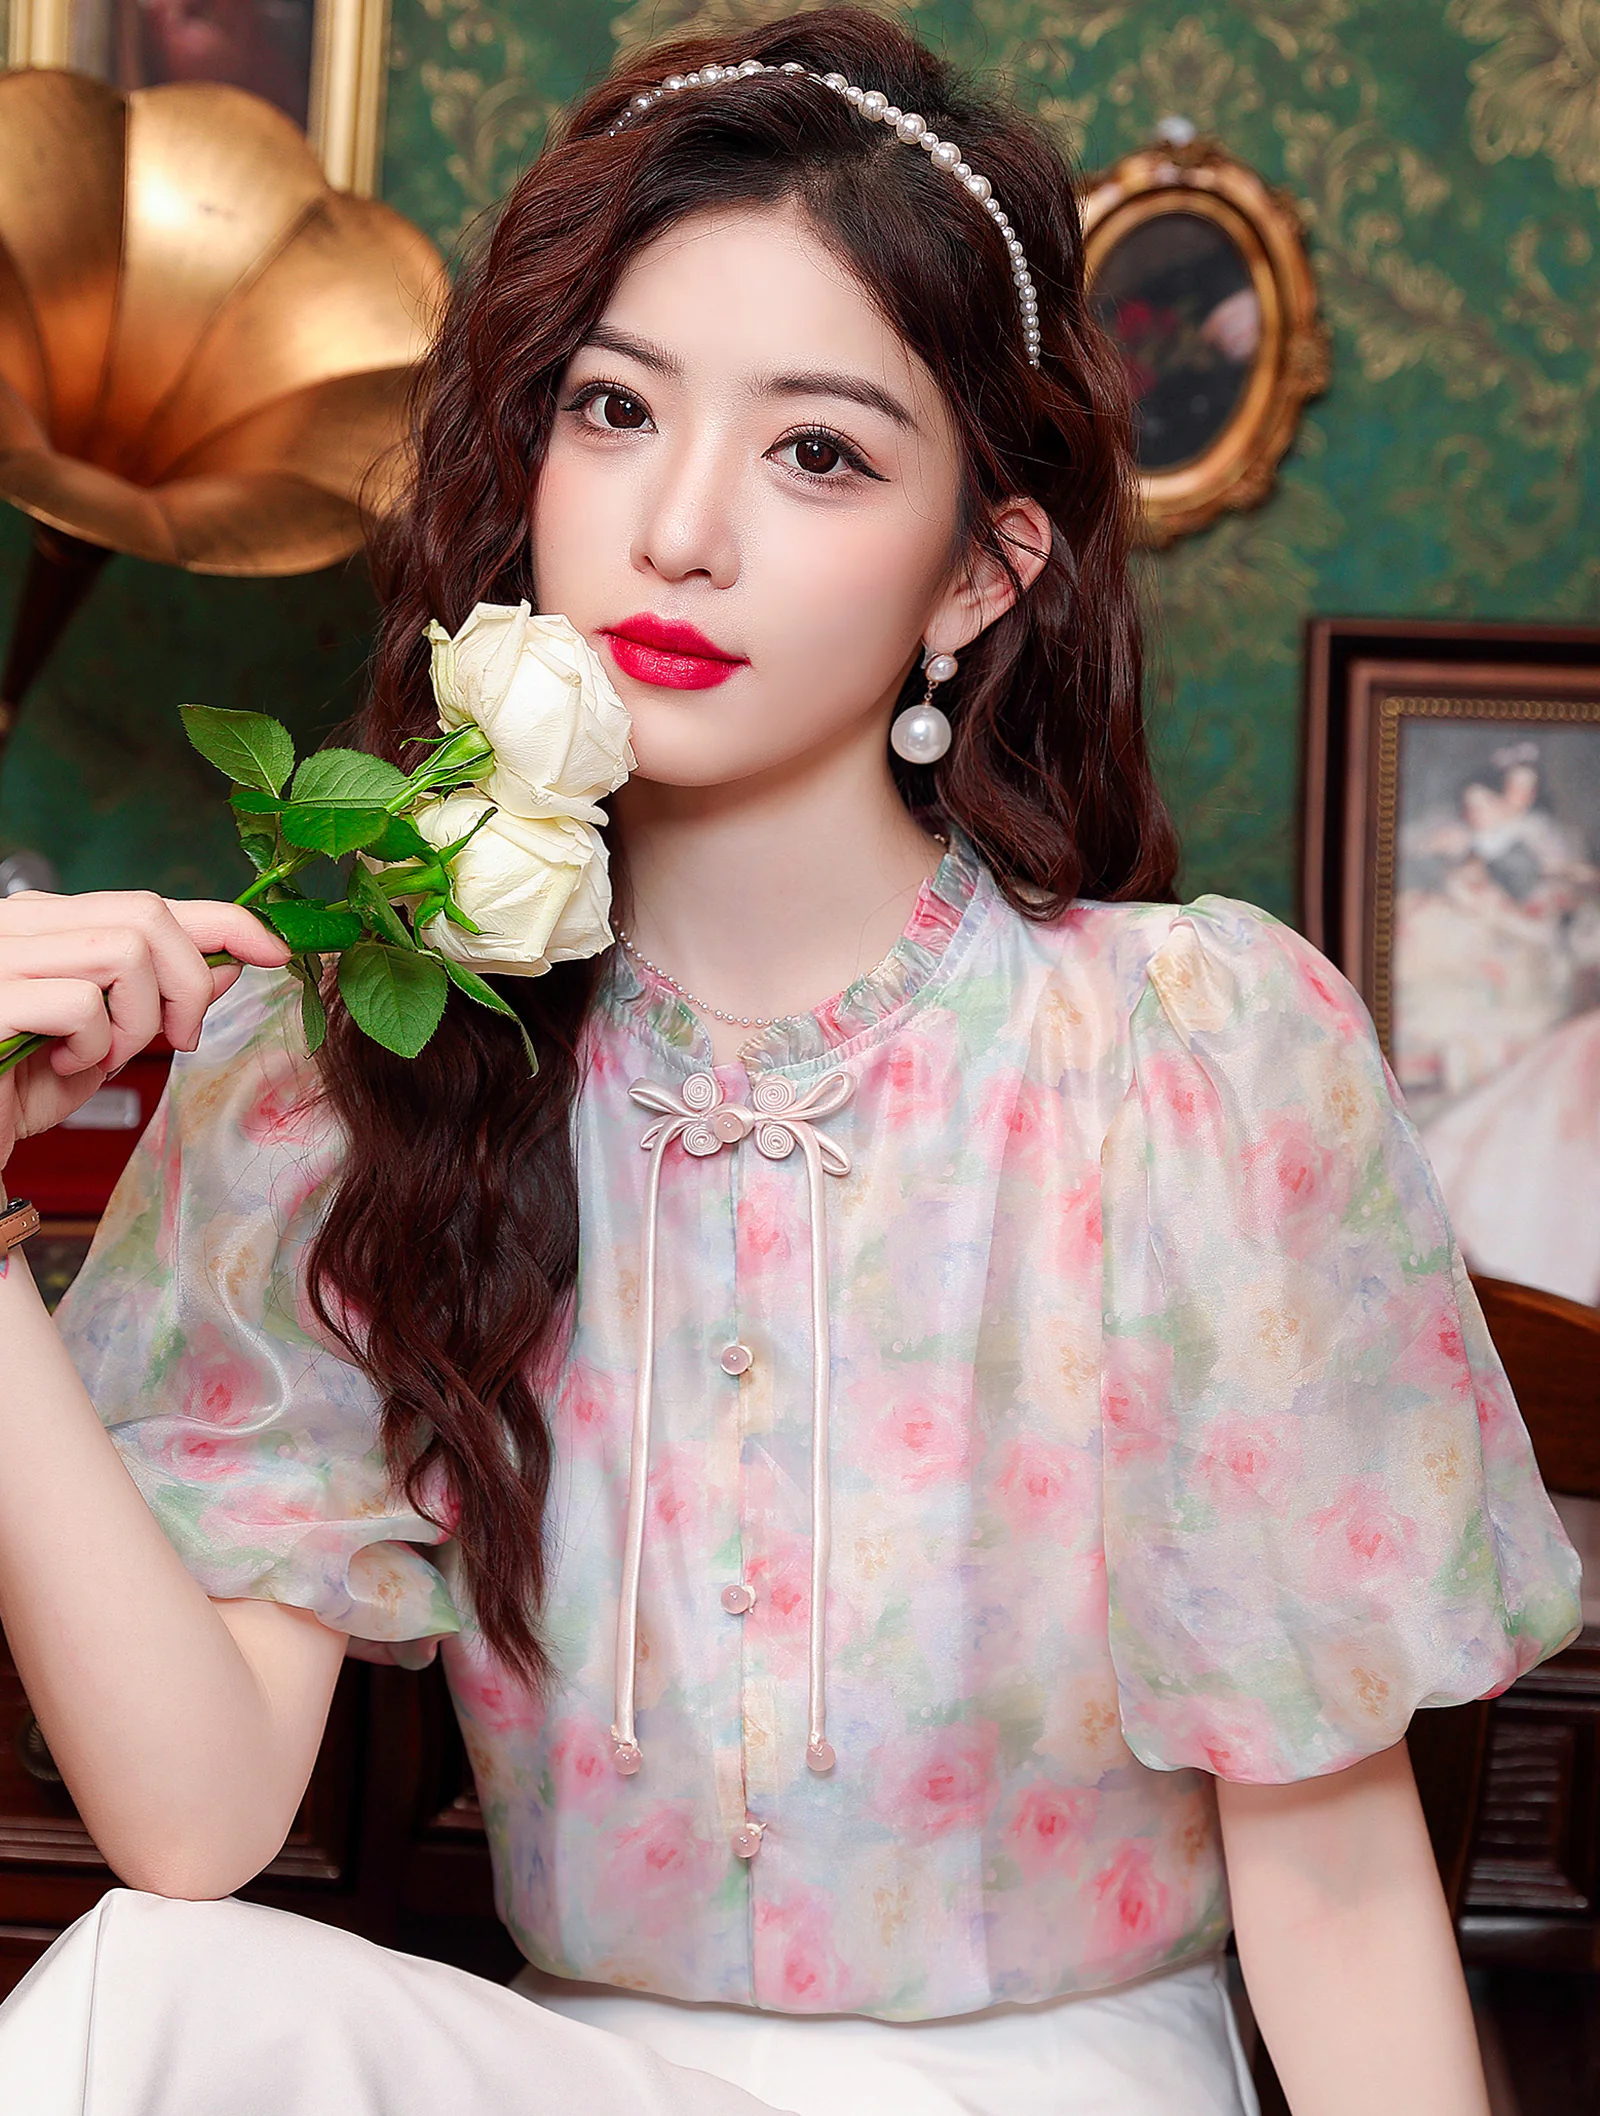 Sweet Ladies Summer Casual Floral Chiffon Shirt with Short Puff Sleeves02